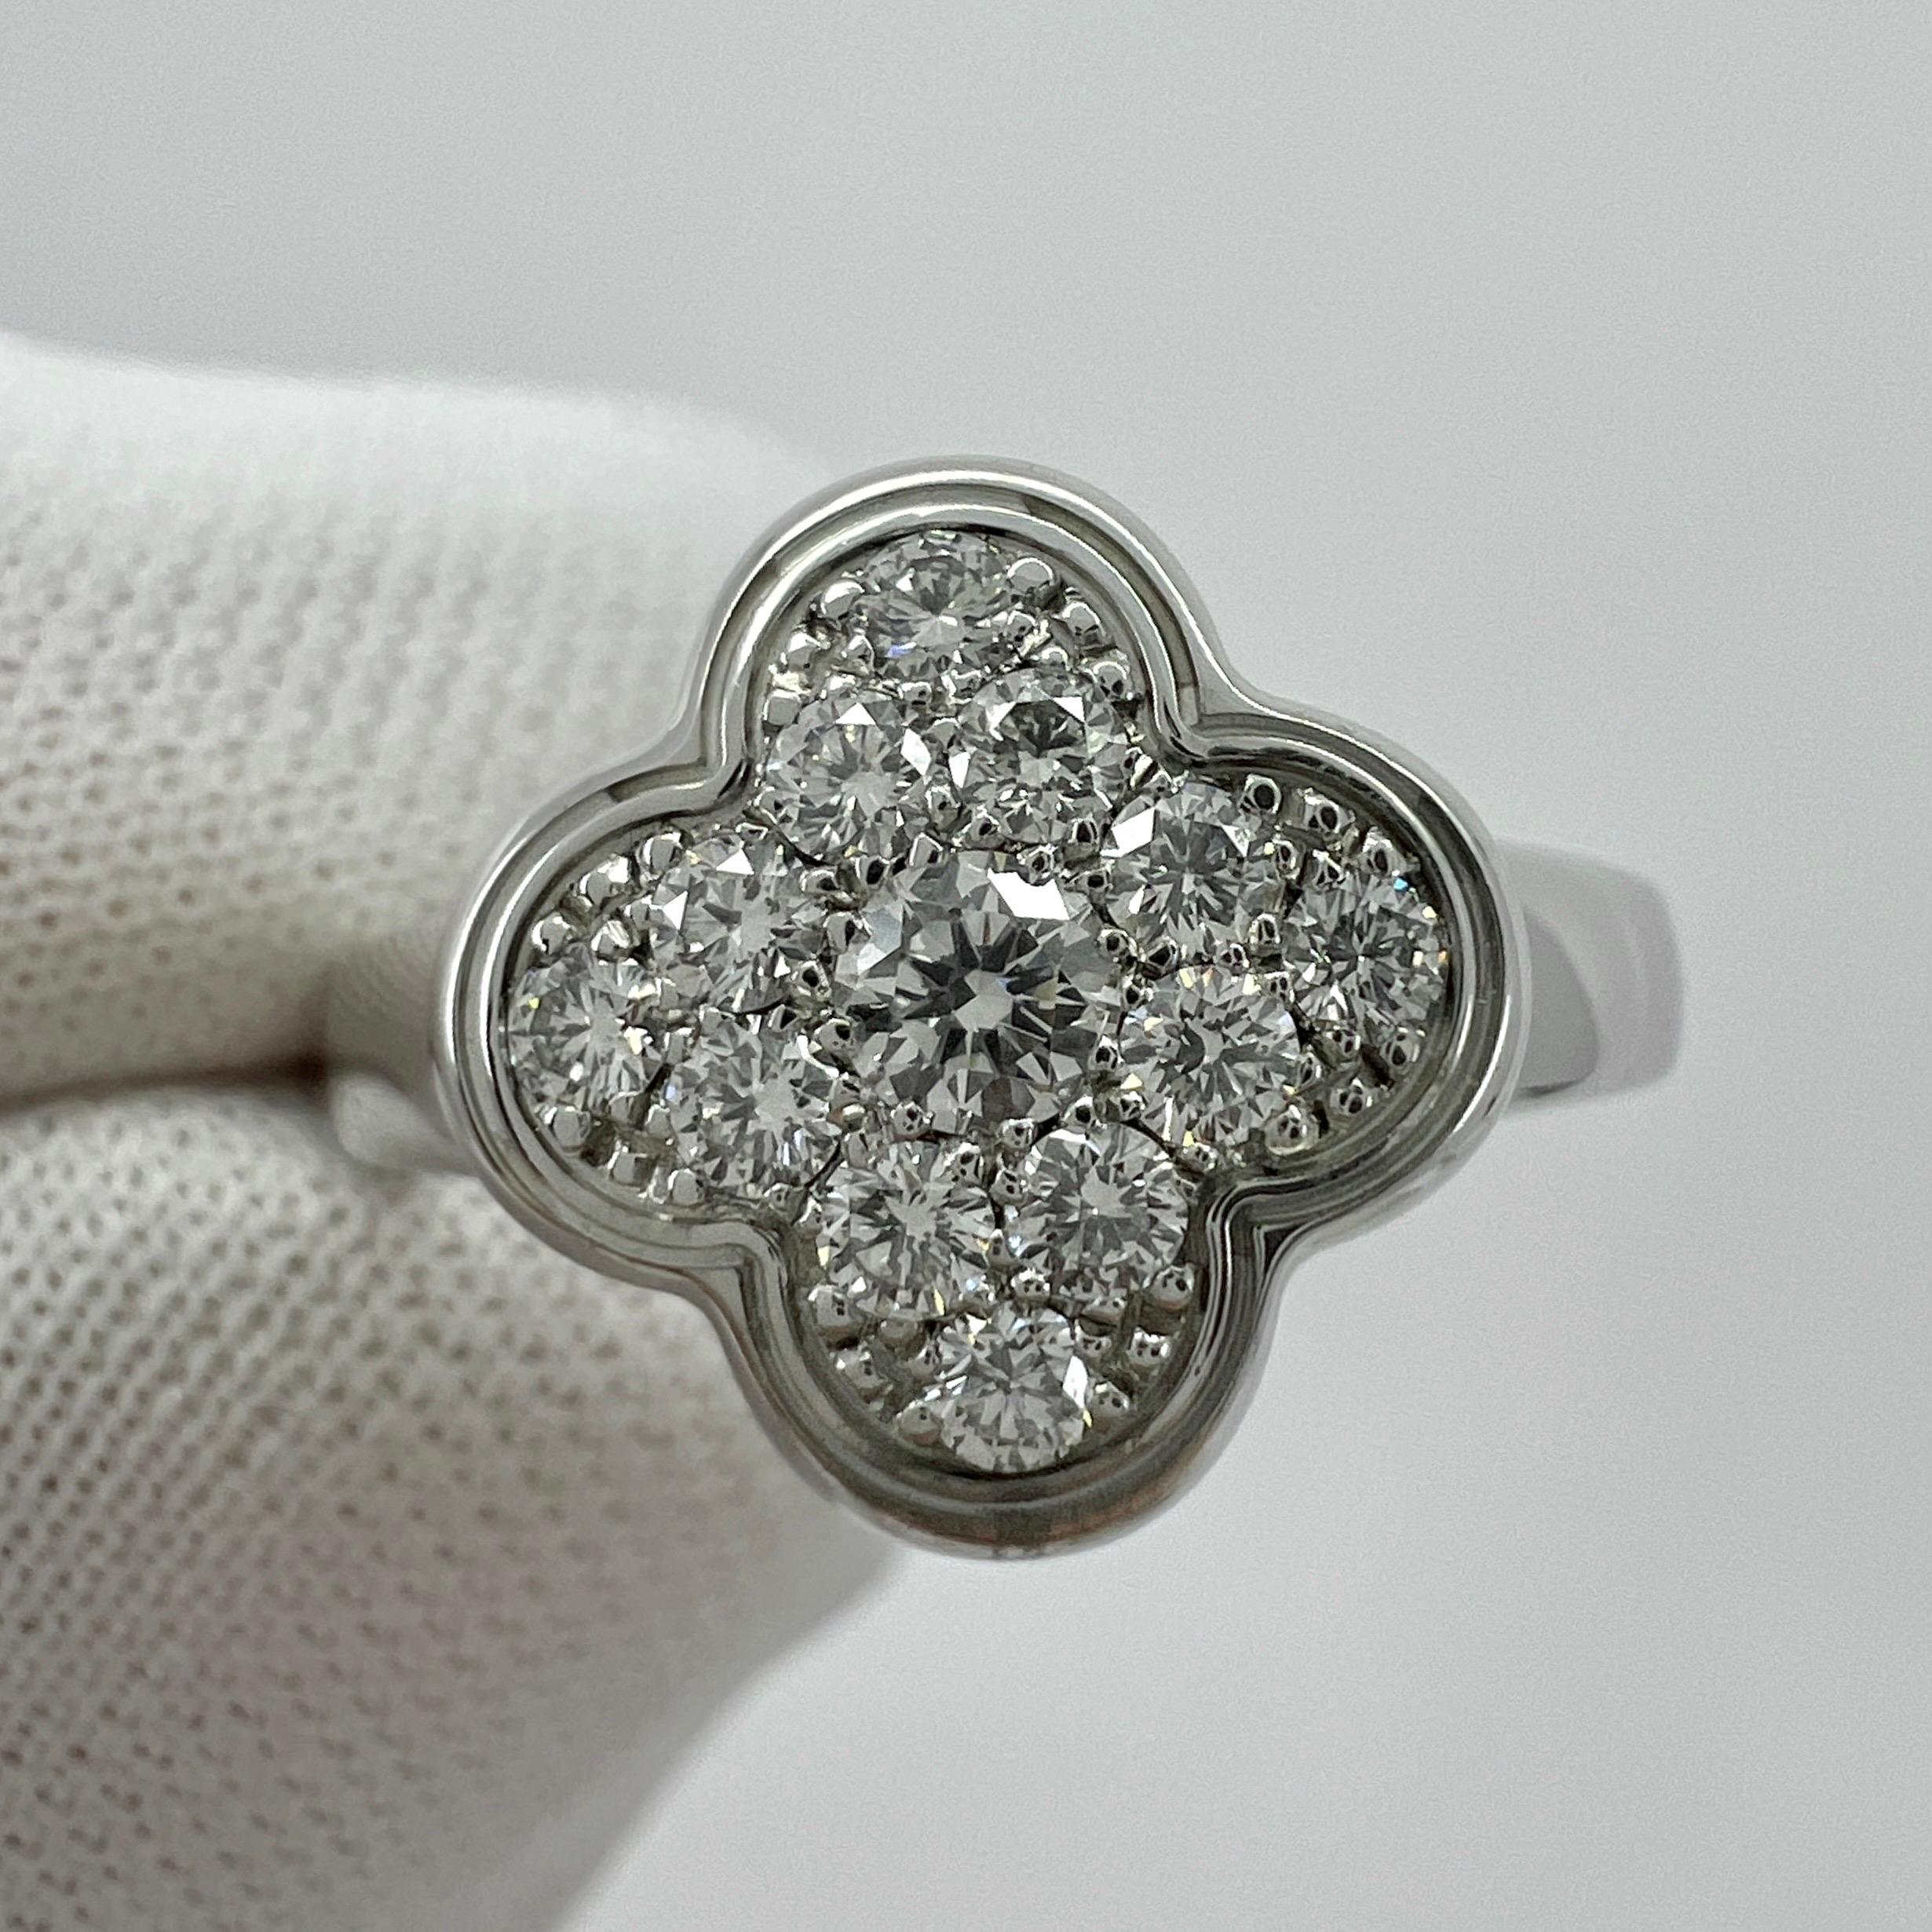 Rare Vintage Van Cleef & Arpels Pure Alhambra Diamond Flower 18k White Gold Ring In Excellent Condition For Sale In Birmingham, GB